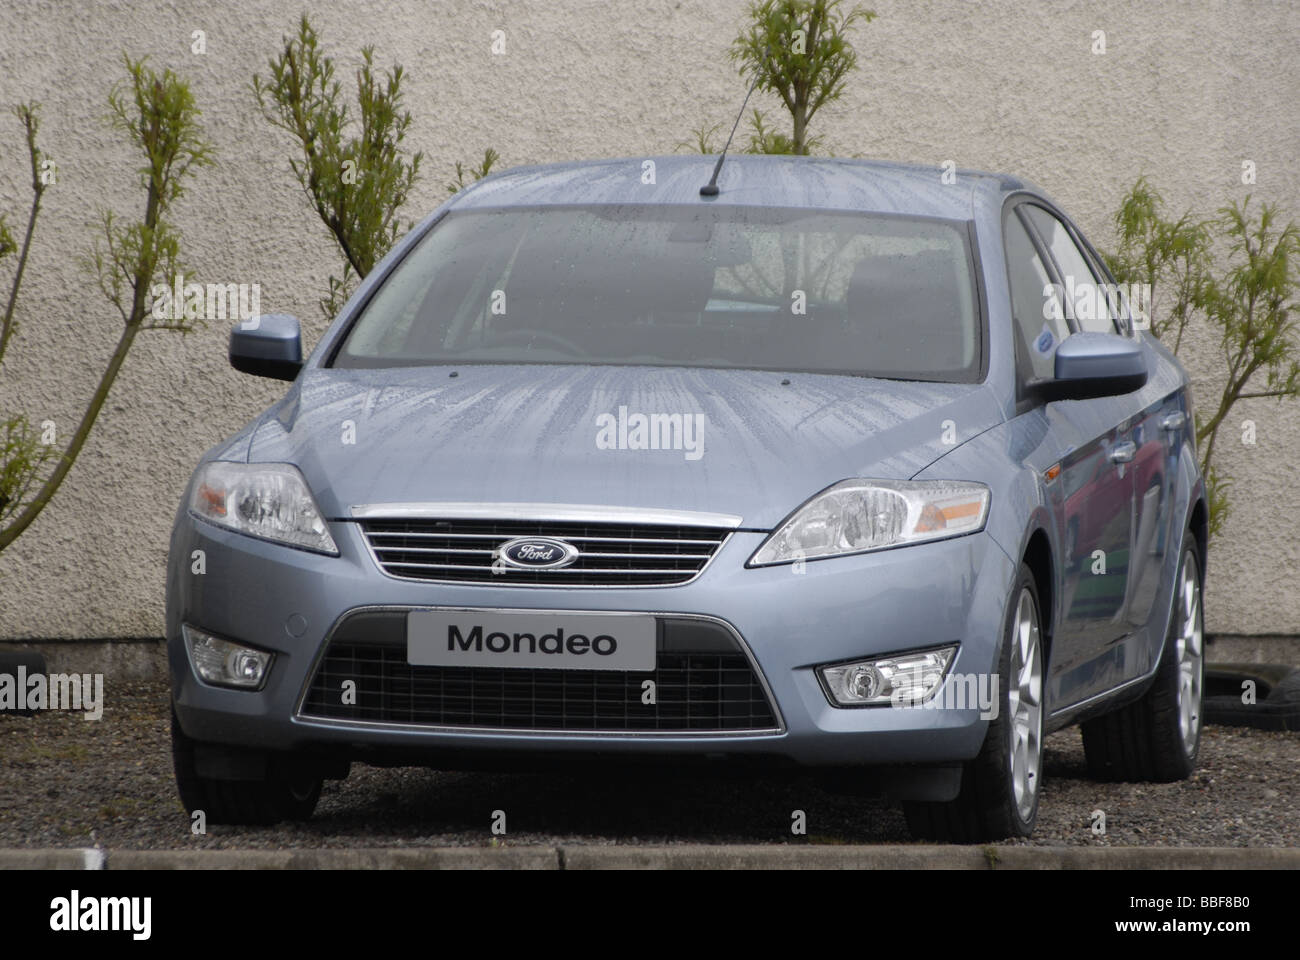 Ford mondeo Stock Photo